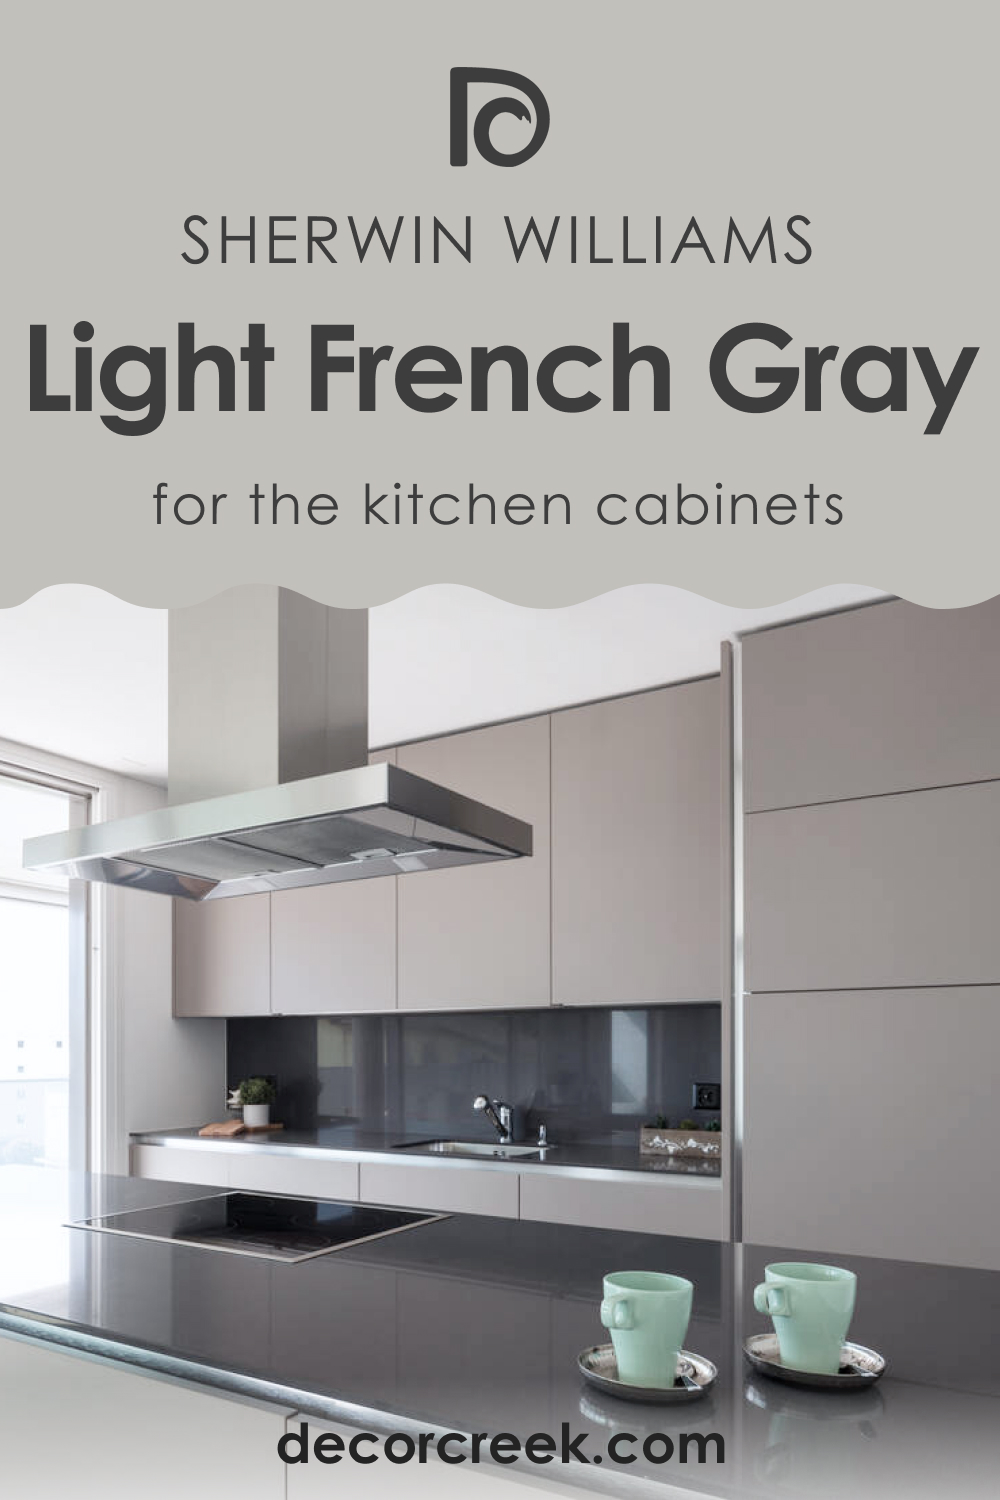 SW 0055 Light French Gray for the Kitchen Cabinets?